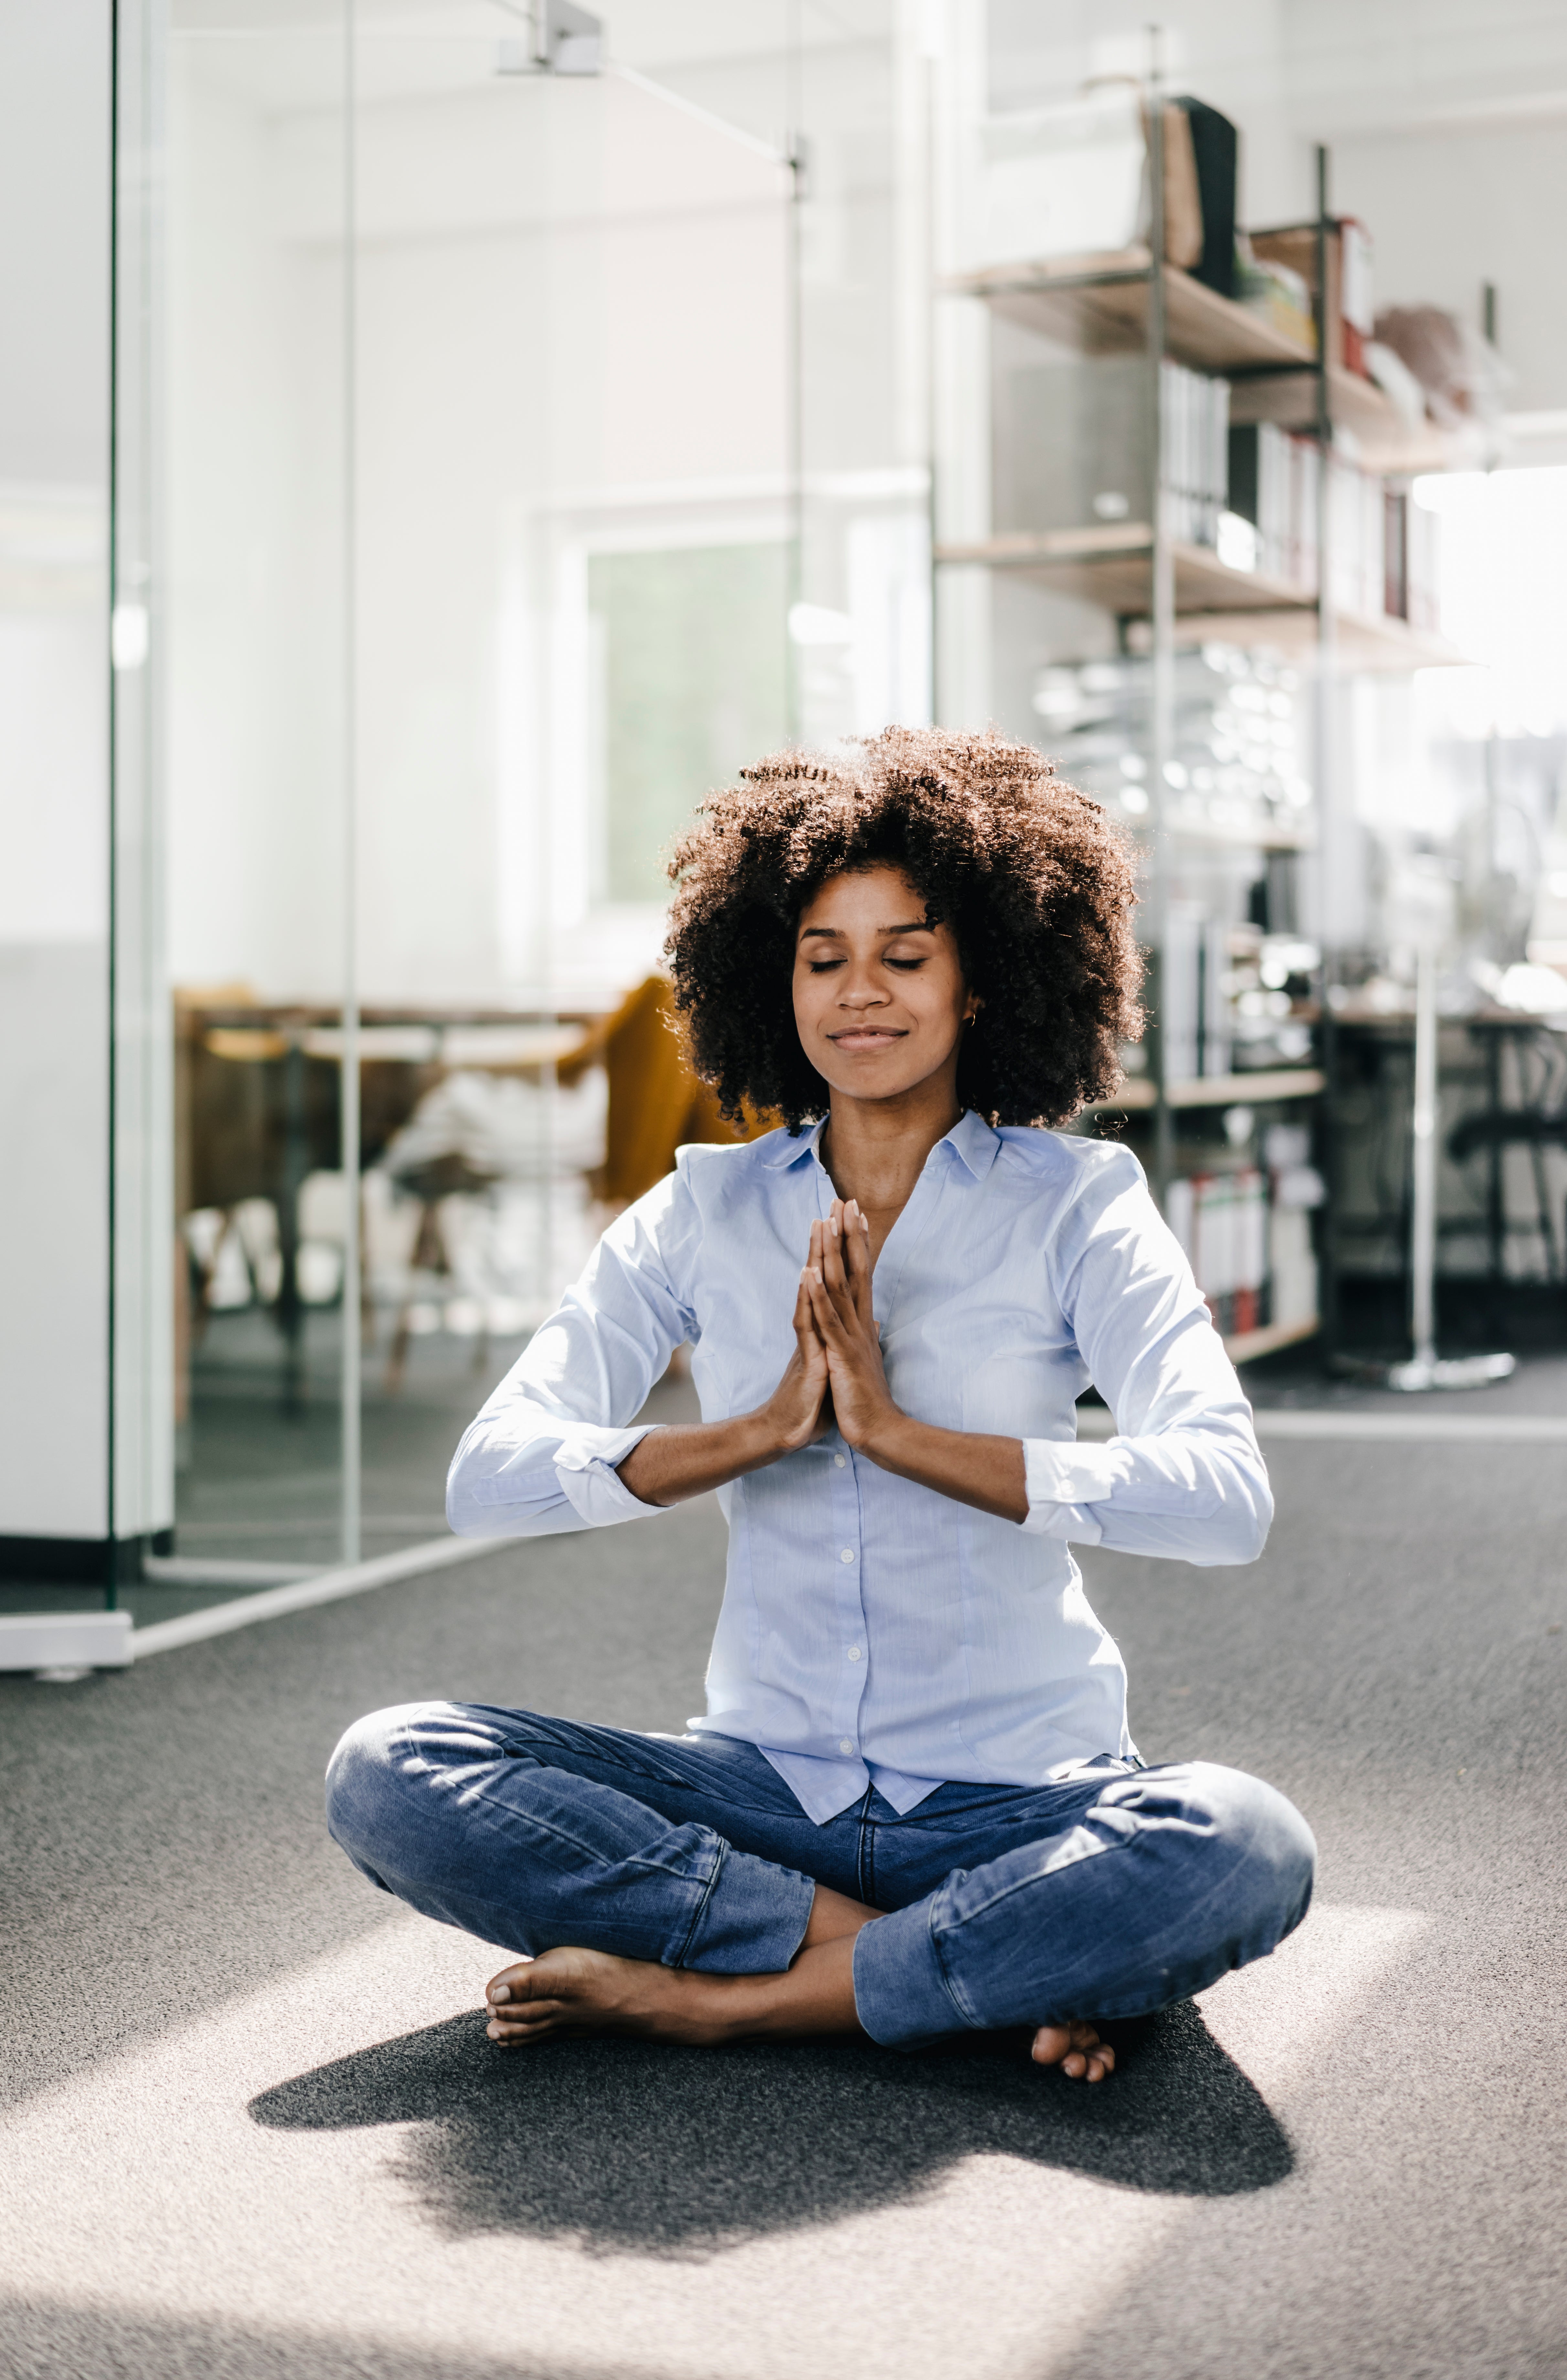 Live A Better Life One Step At A Time: Adding These Wellness Practices To Your Routine Will Change Everything